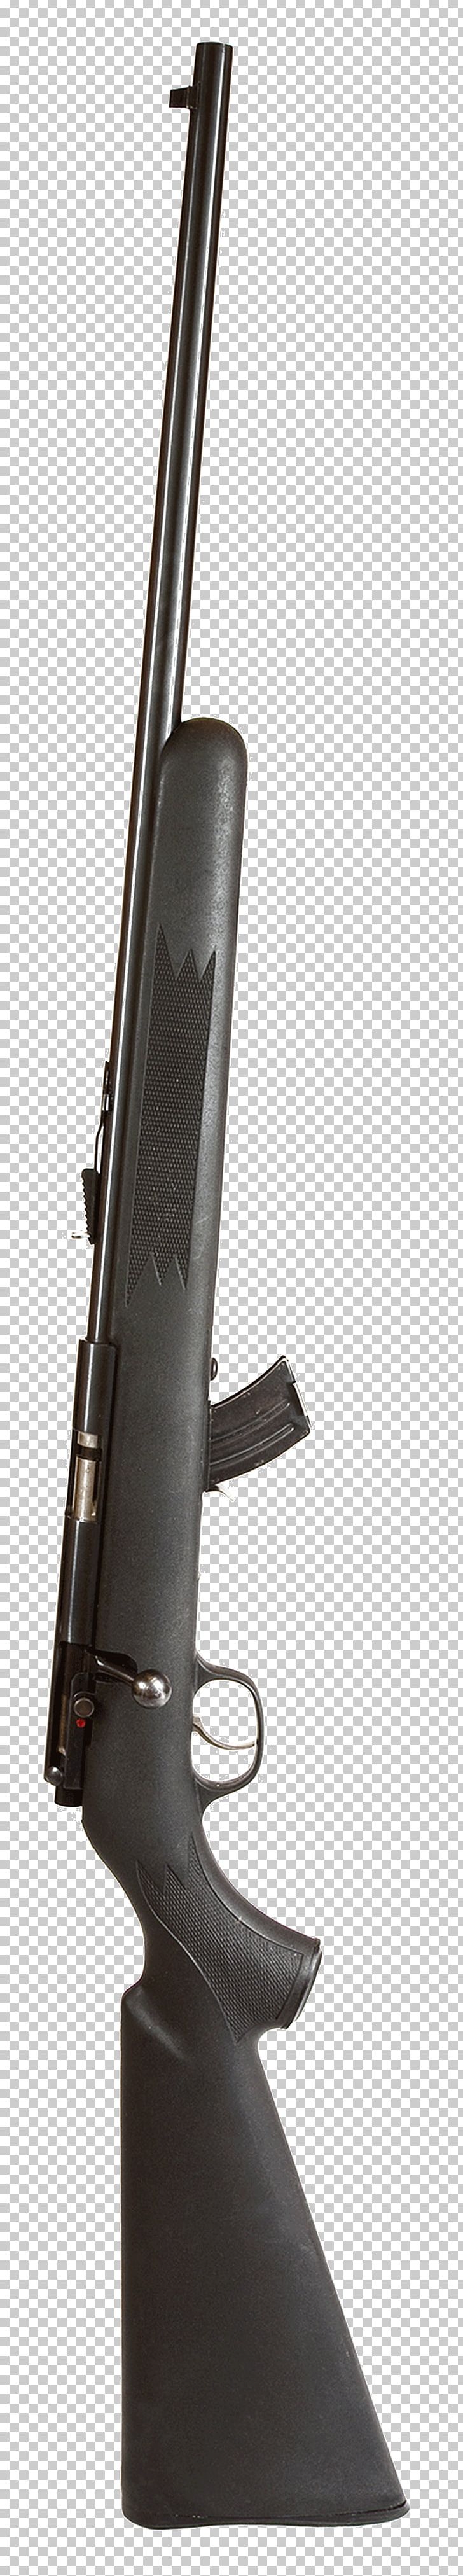 Sniper Rifle Weapon Military Shotgun PNG, Clipart, Angle, Arms, British Military Rifles, Firearm, Military Free PNG Download